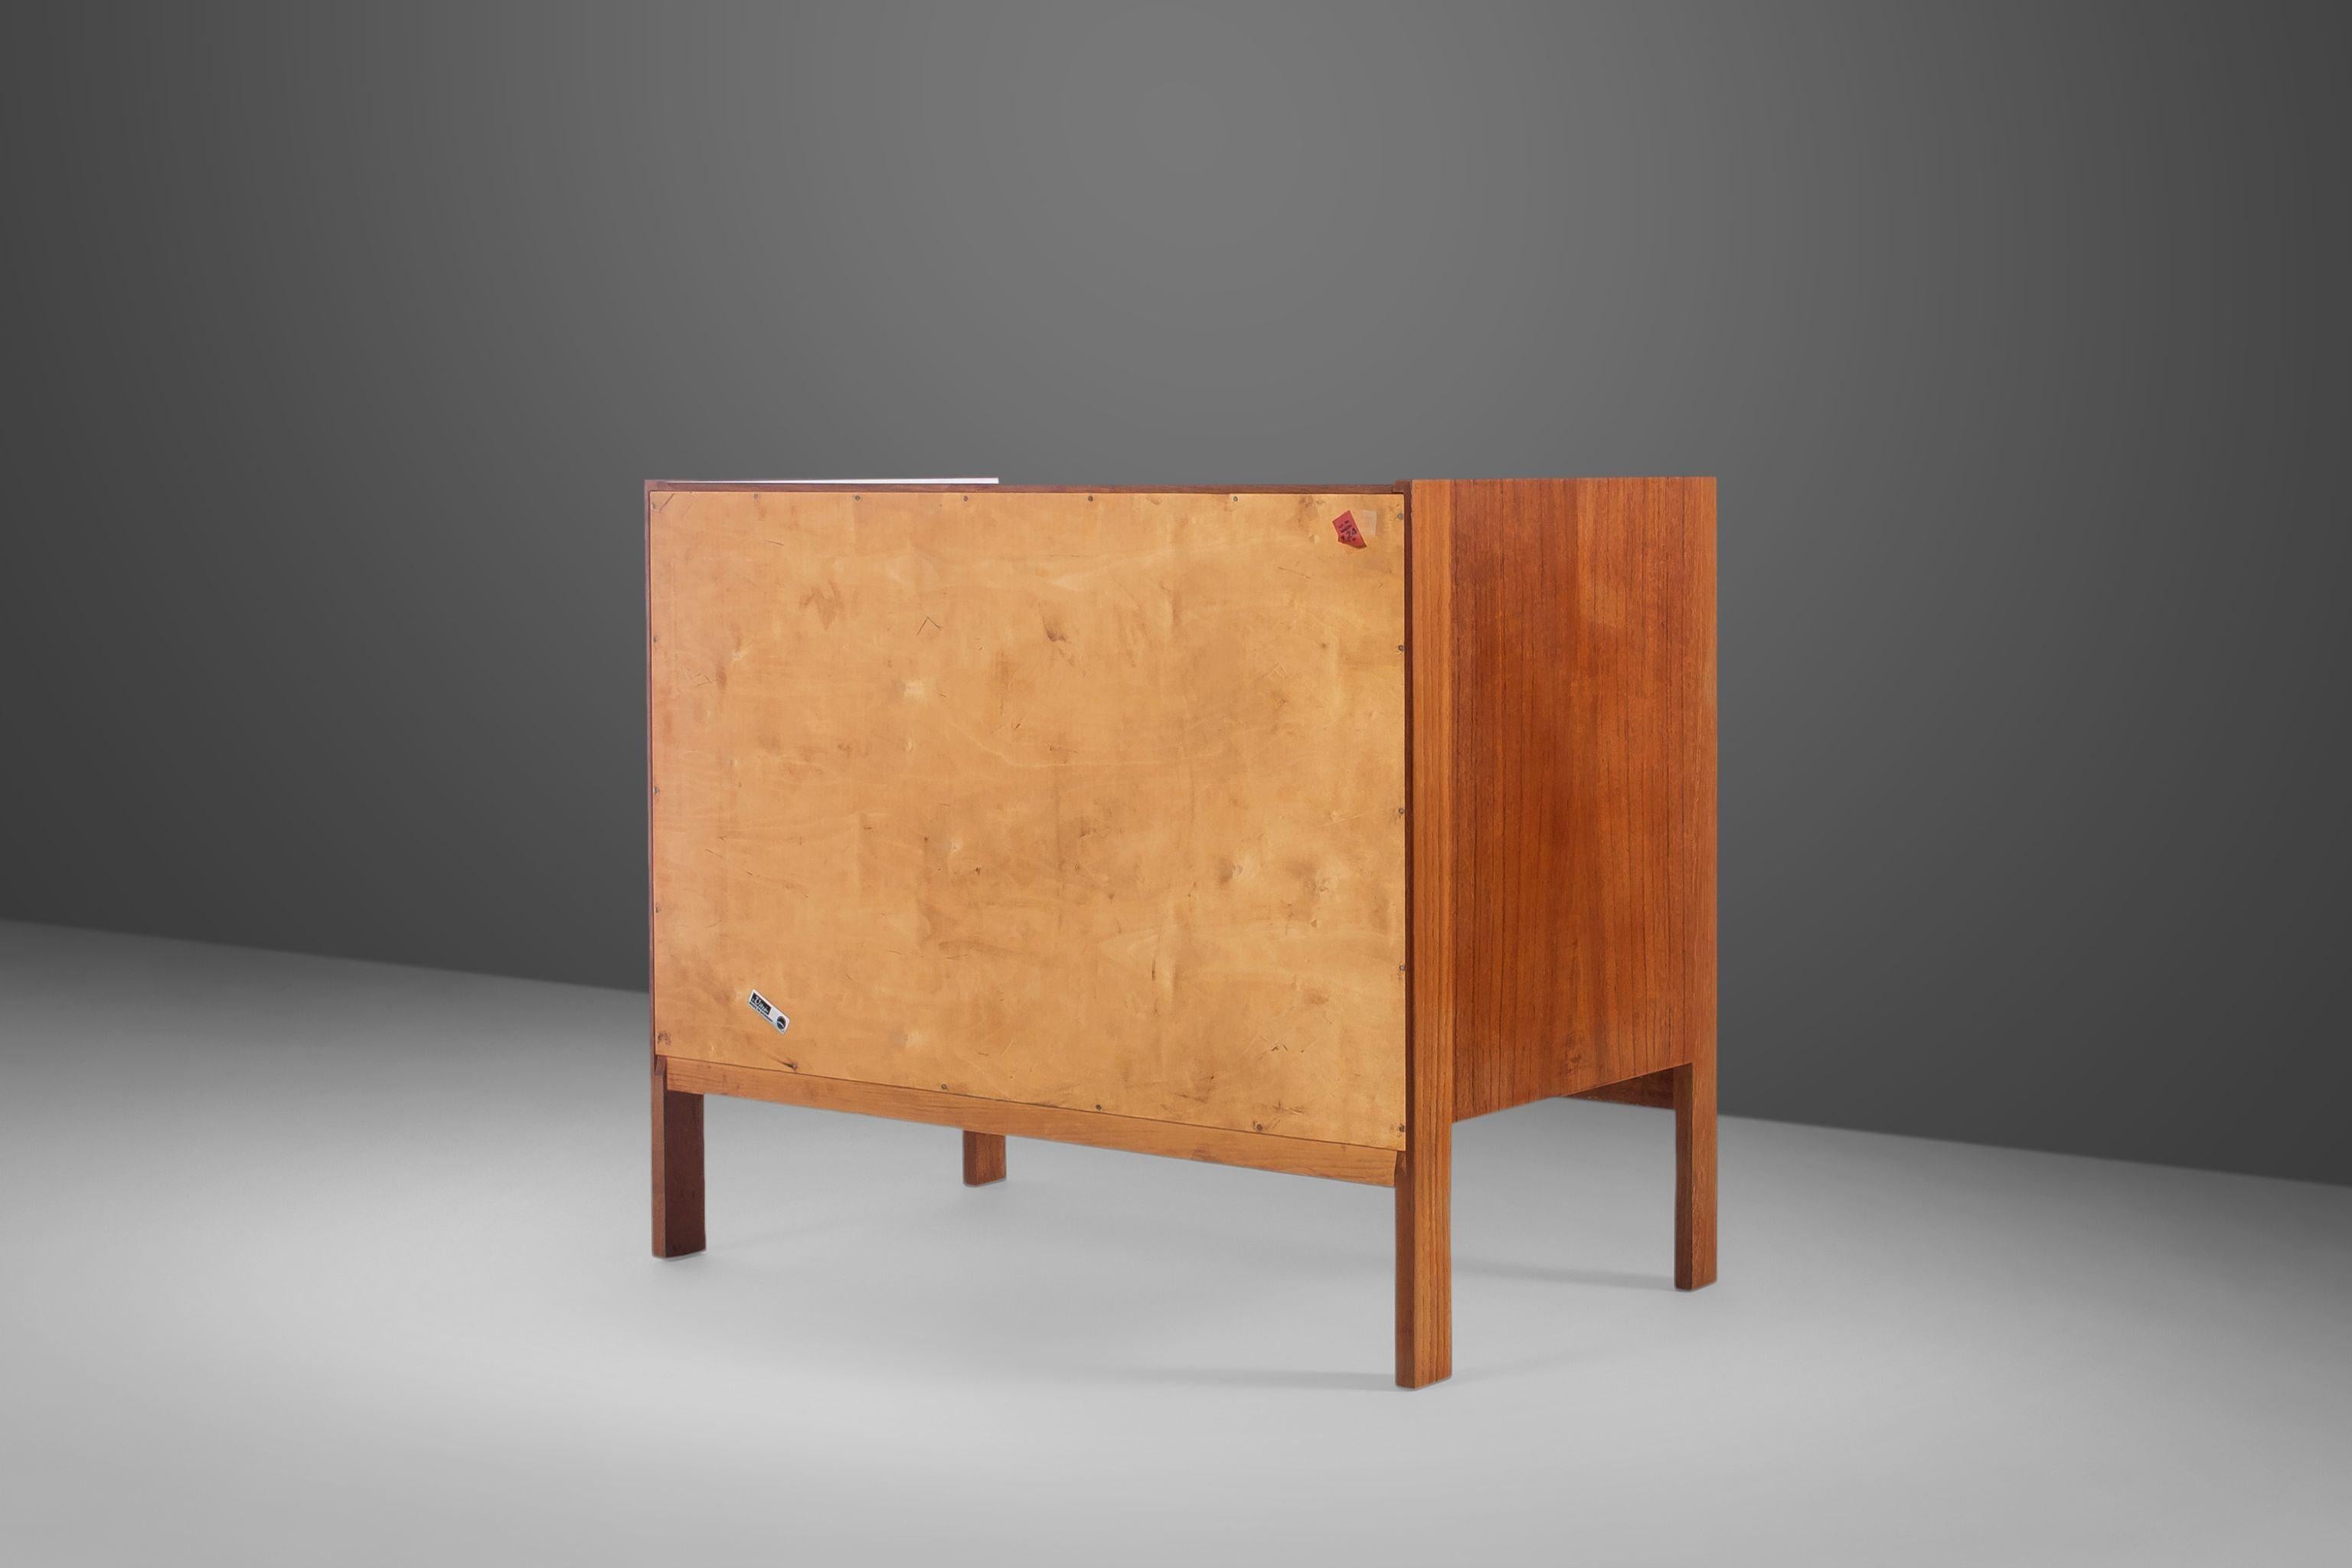 Danish Modern Chest of Drawers / Three '3' Drawer Dresser by Vitre, c. 1970s For Sale 4